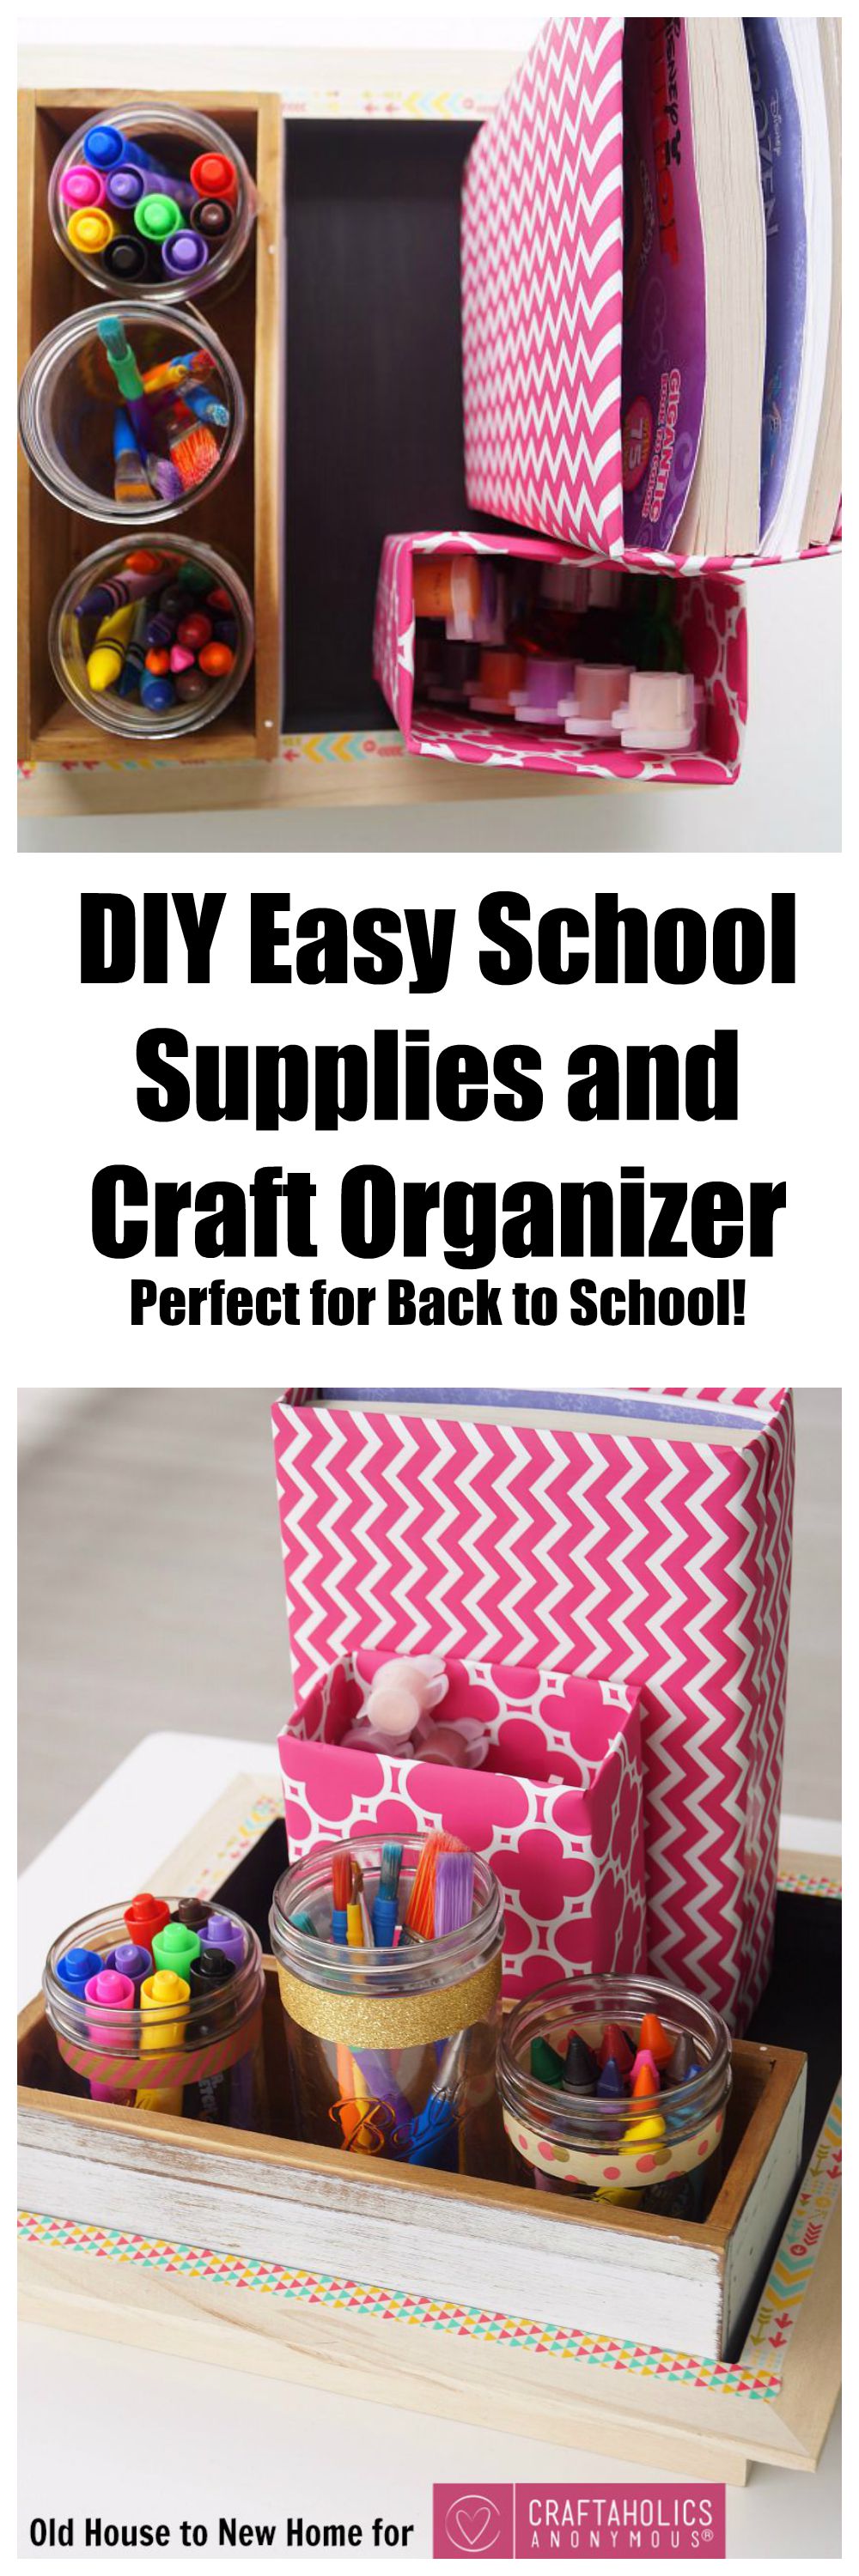 Gramco School Supplies - Save On Arts and Crafts Materials